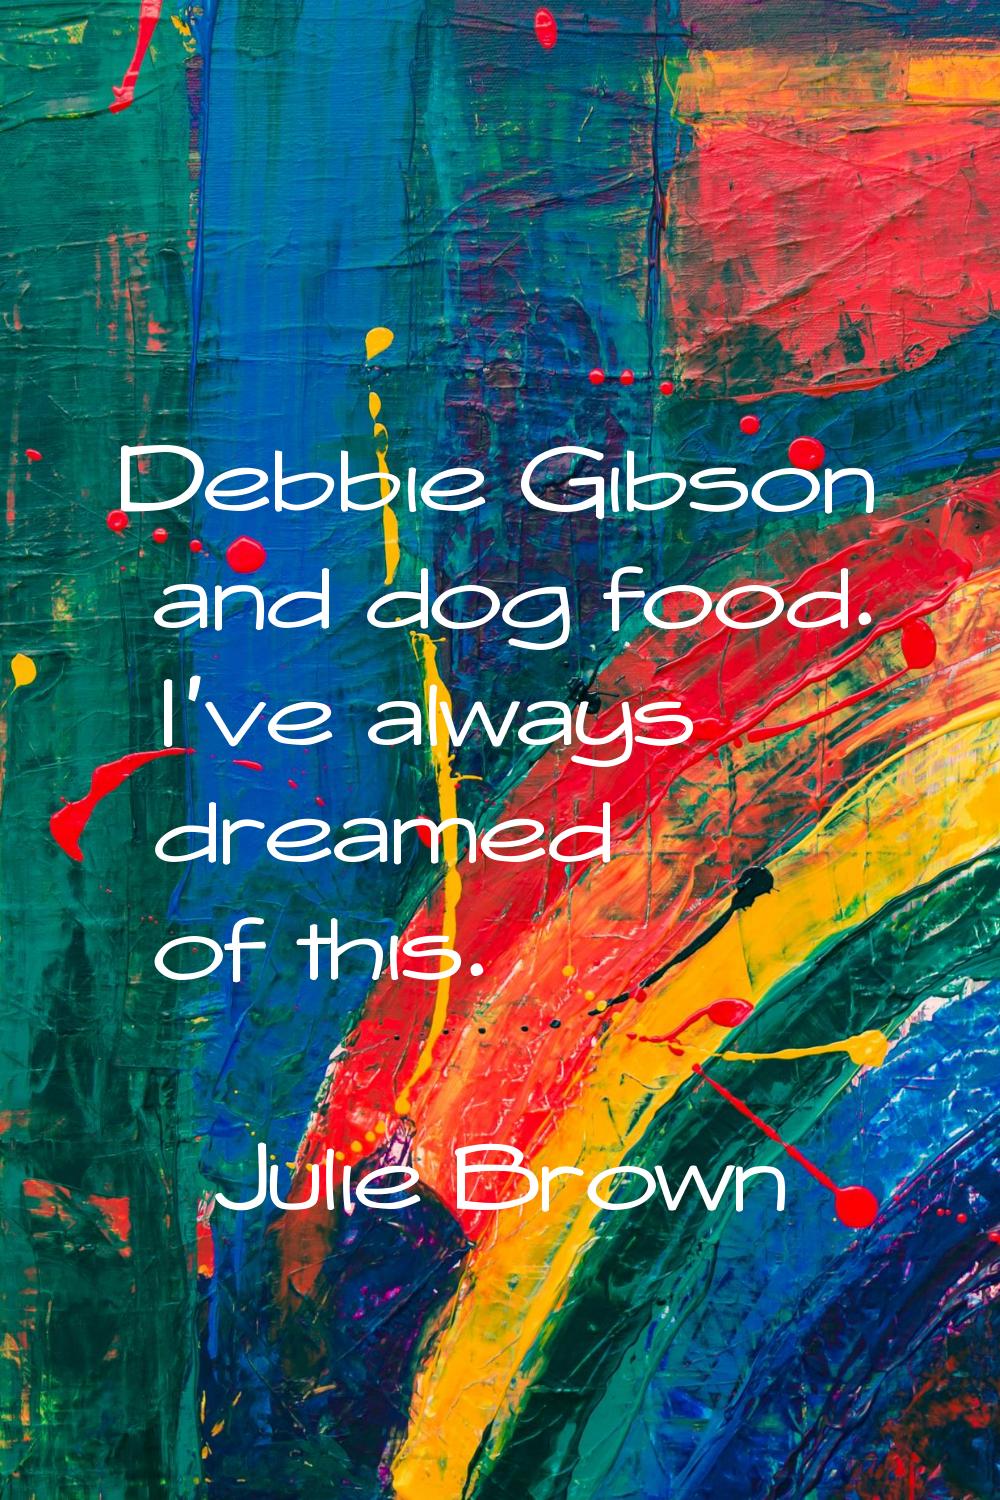 Debbie Gibson and dog food. I've always dreamed of this.